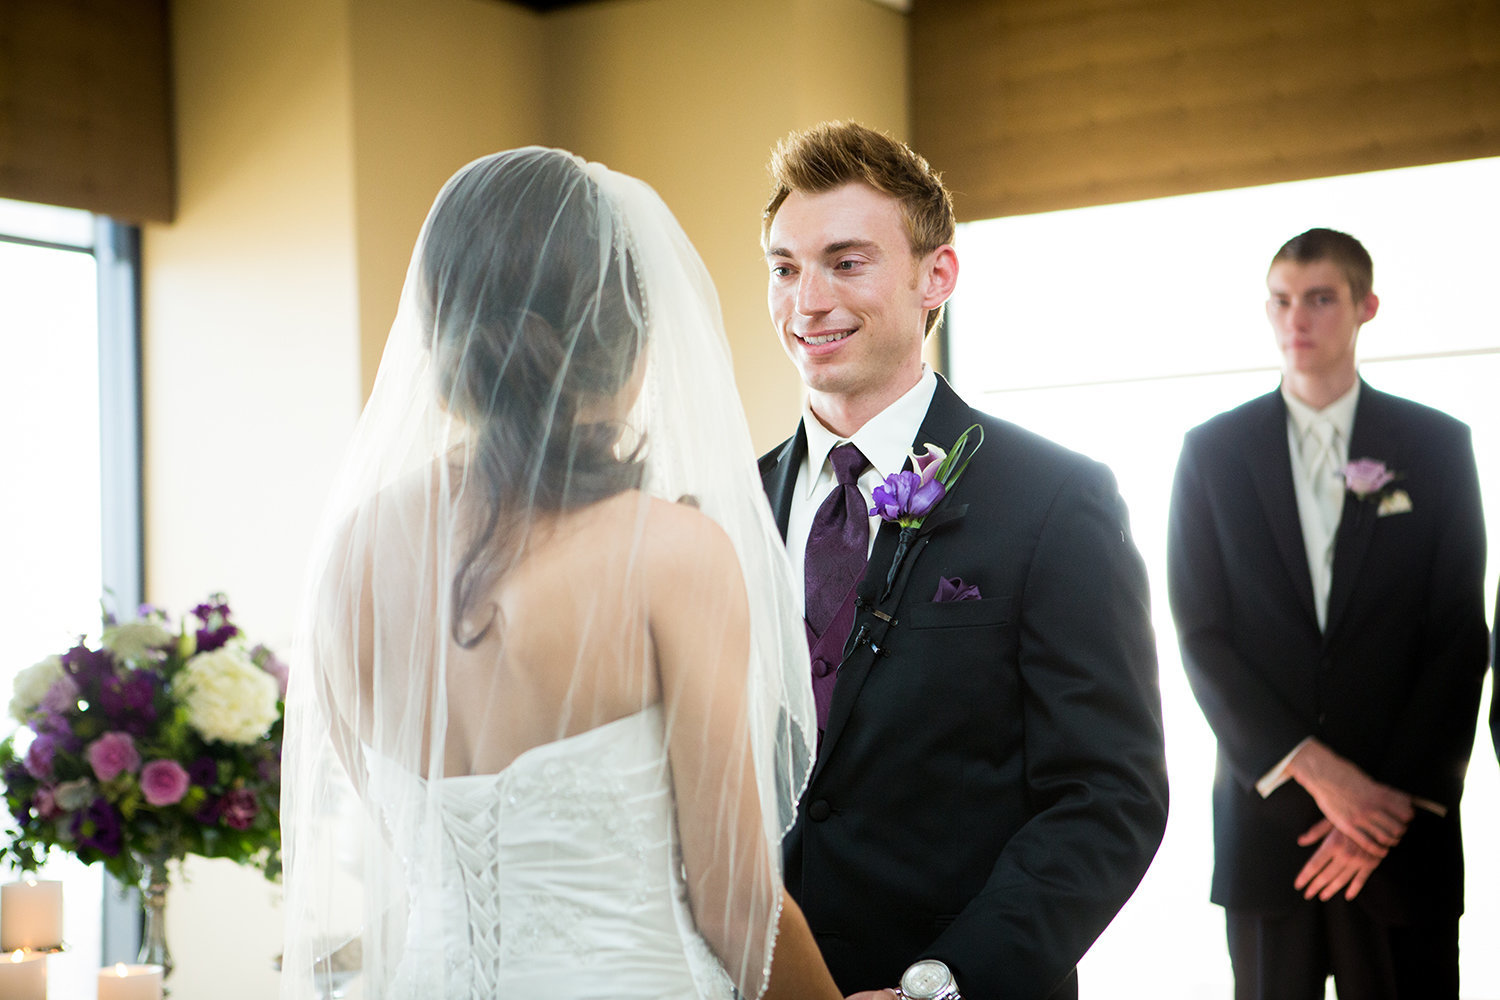 Wedding vows make for the best moments